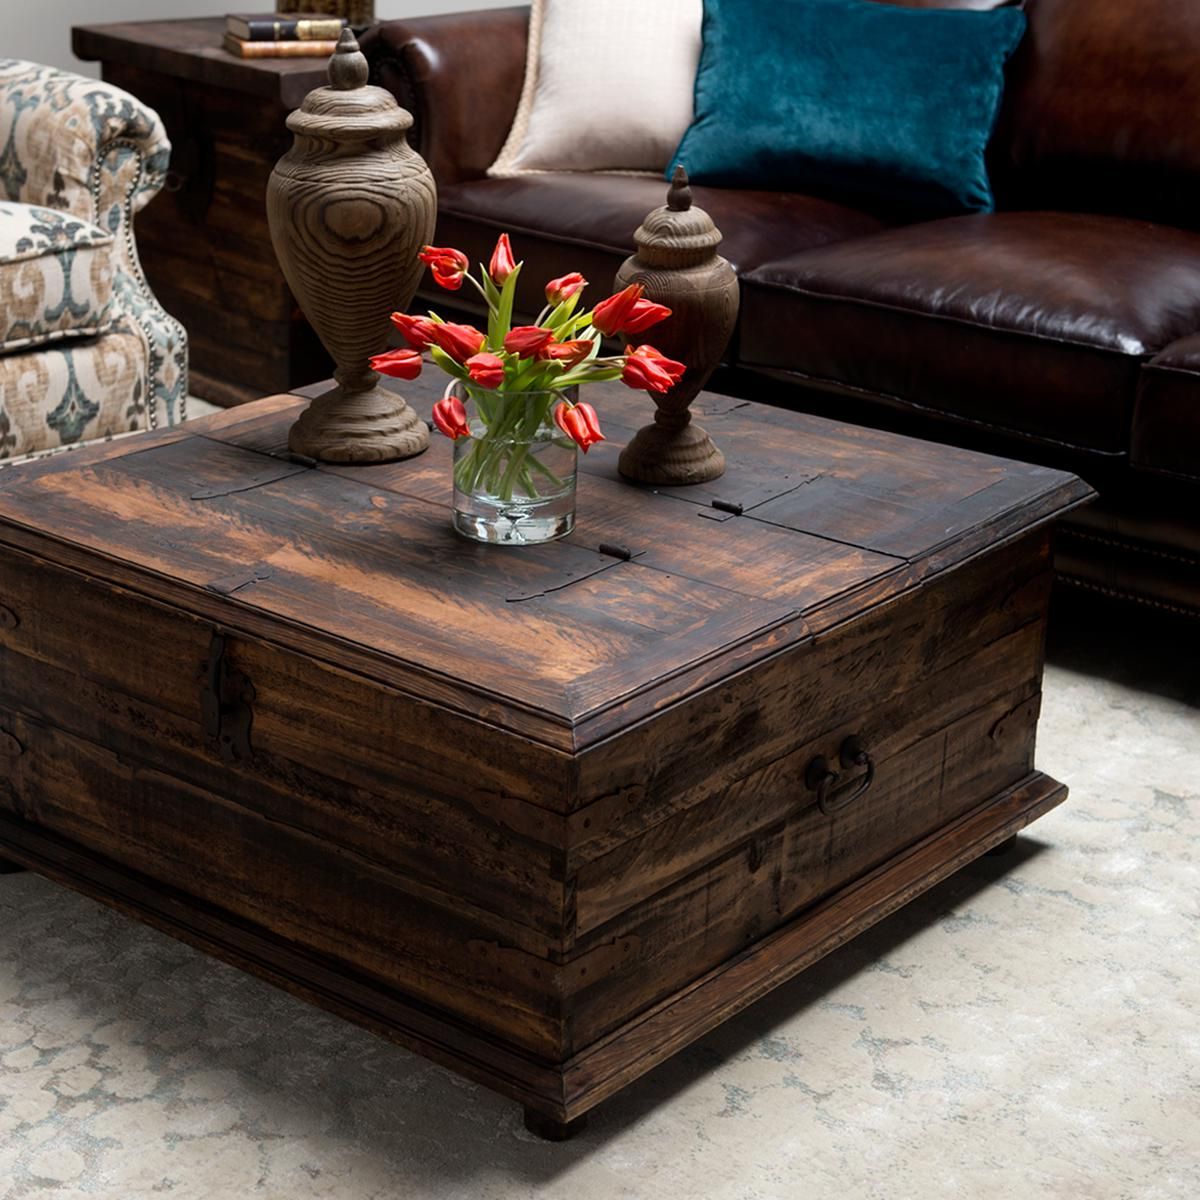 Rustic Trunk Coffee Table For Your Living Room – Homes Furniture Ideas With Rustic Wood Coffee Tables (View 12 of 20)